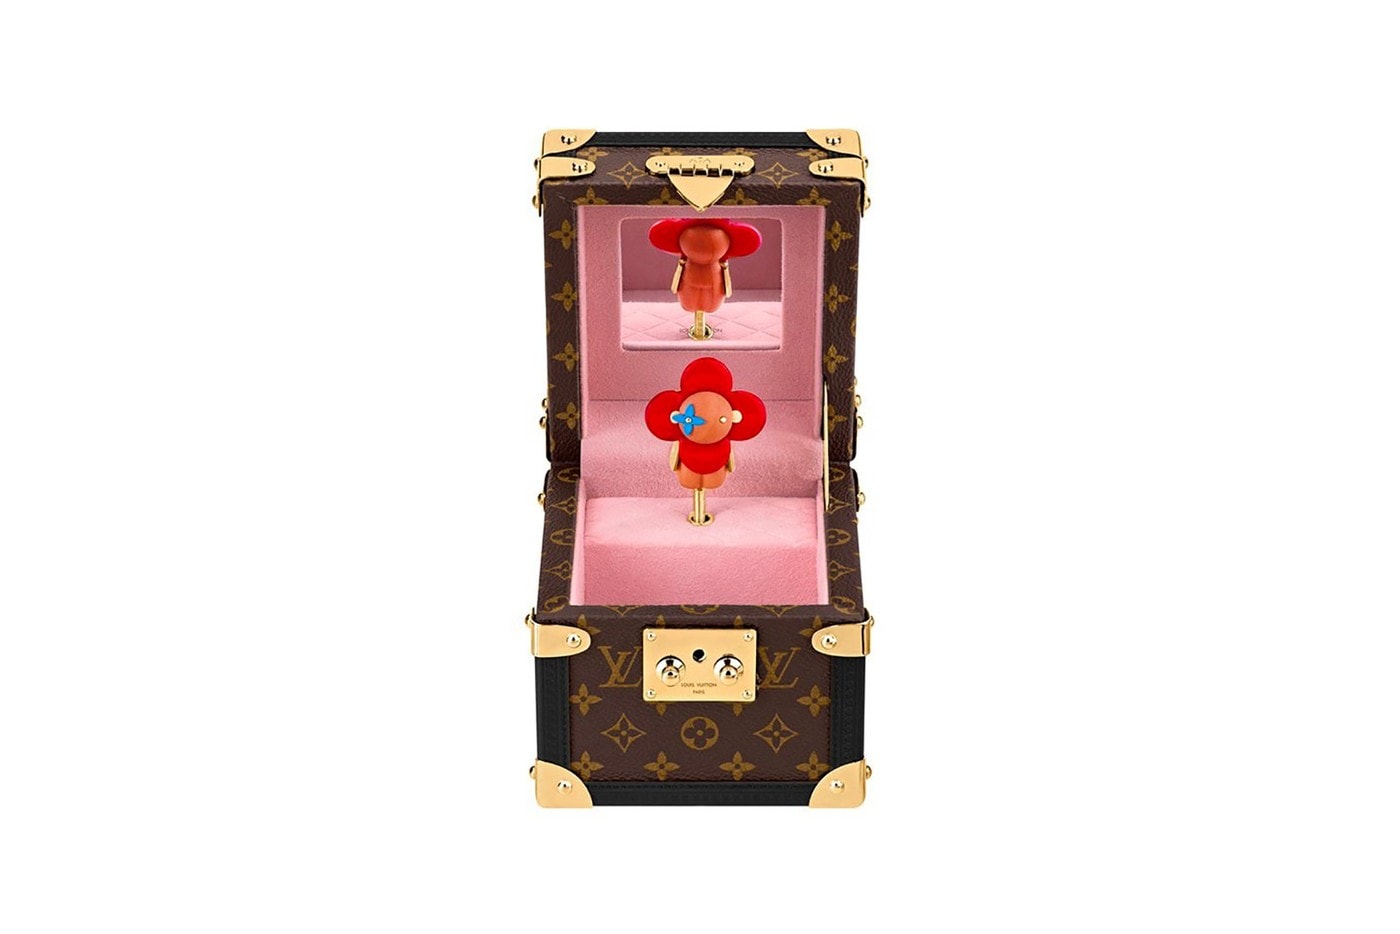 Louis vuitton home goods collection games toys jenga accessories homeware release